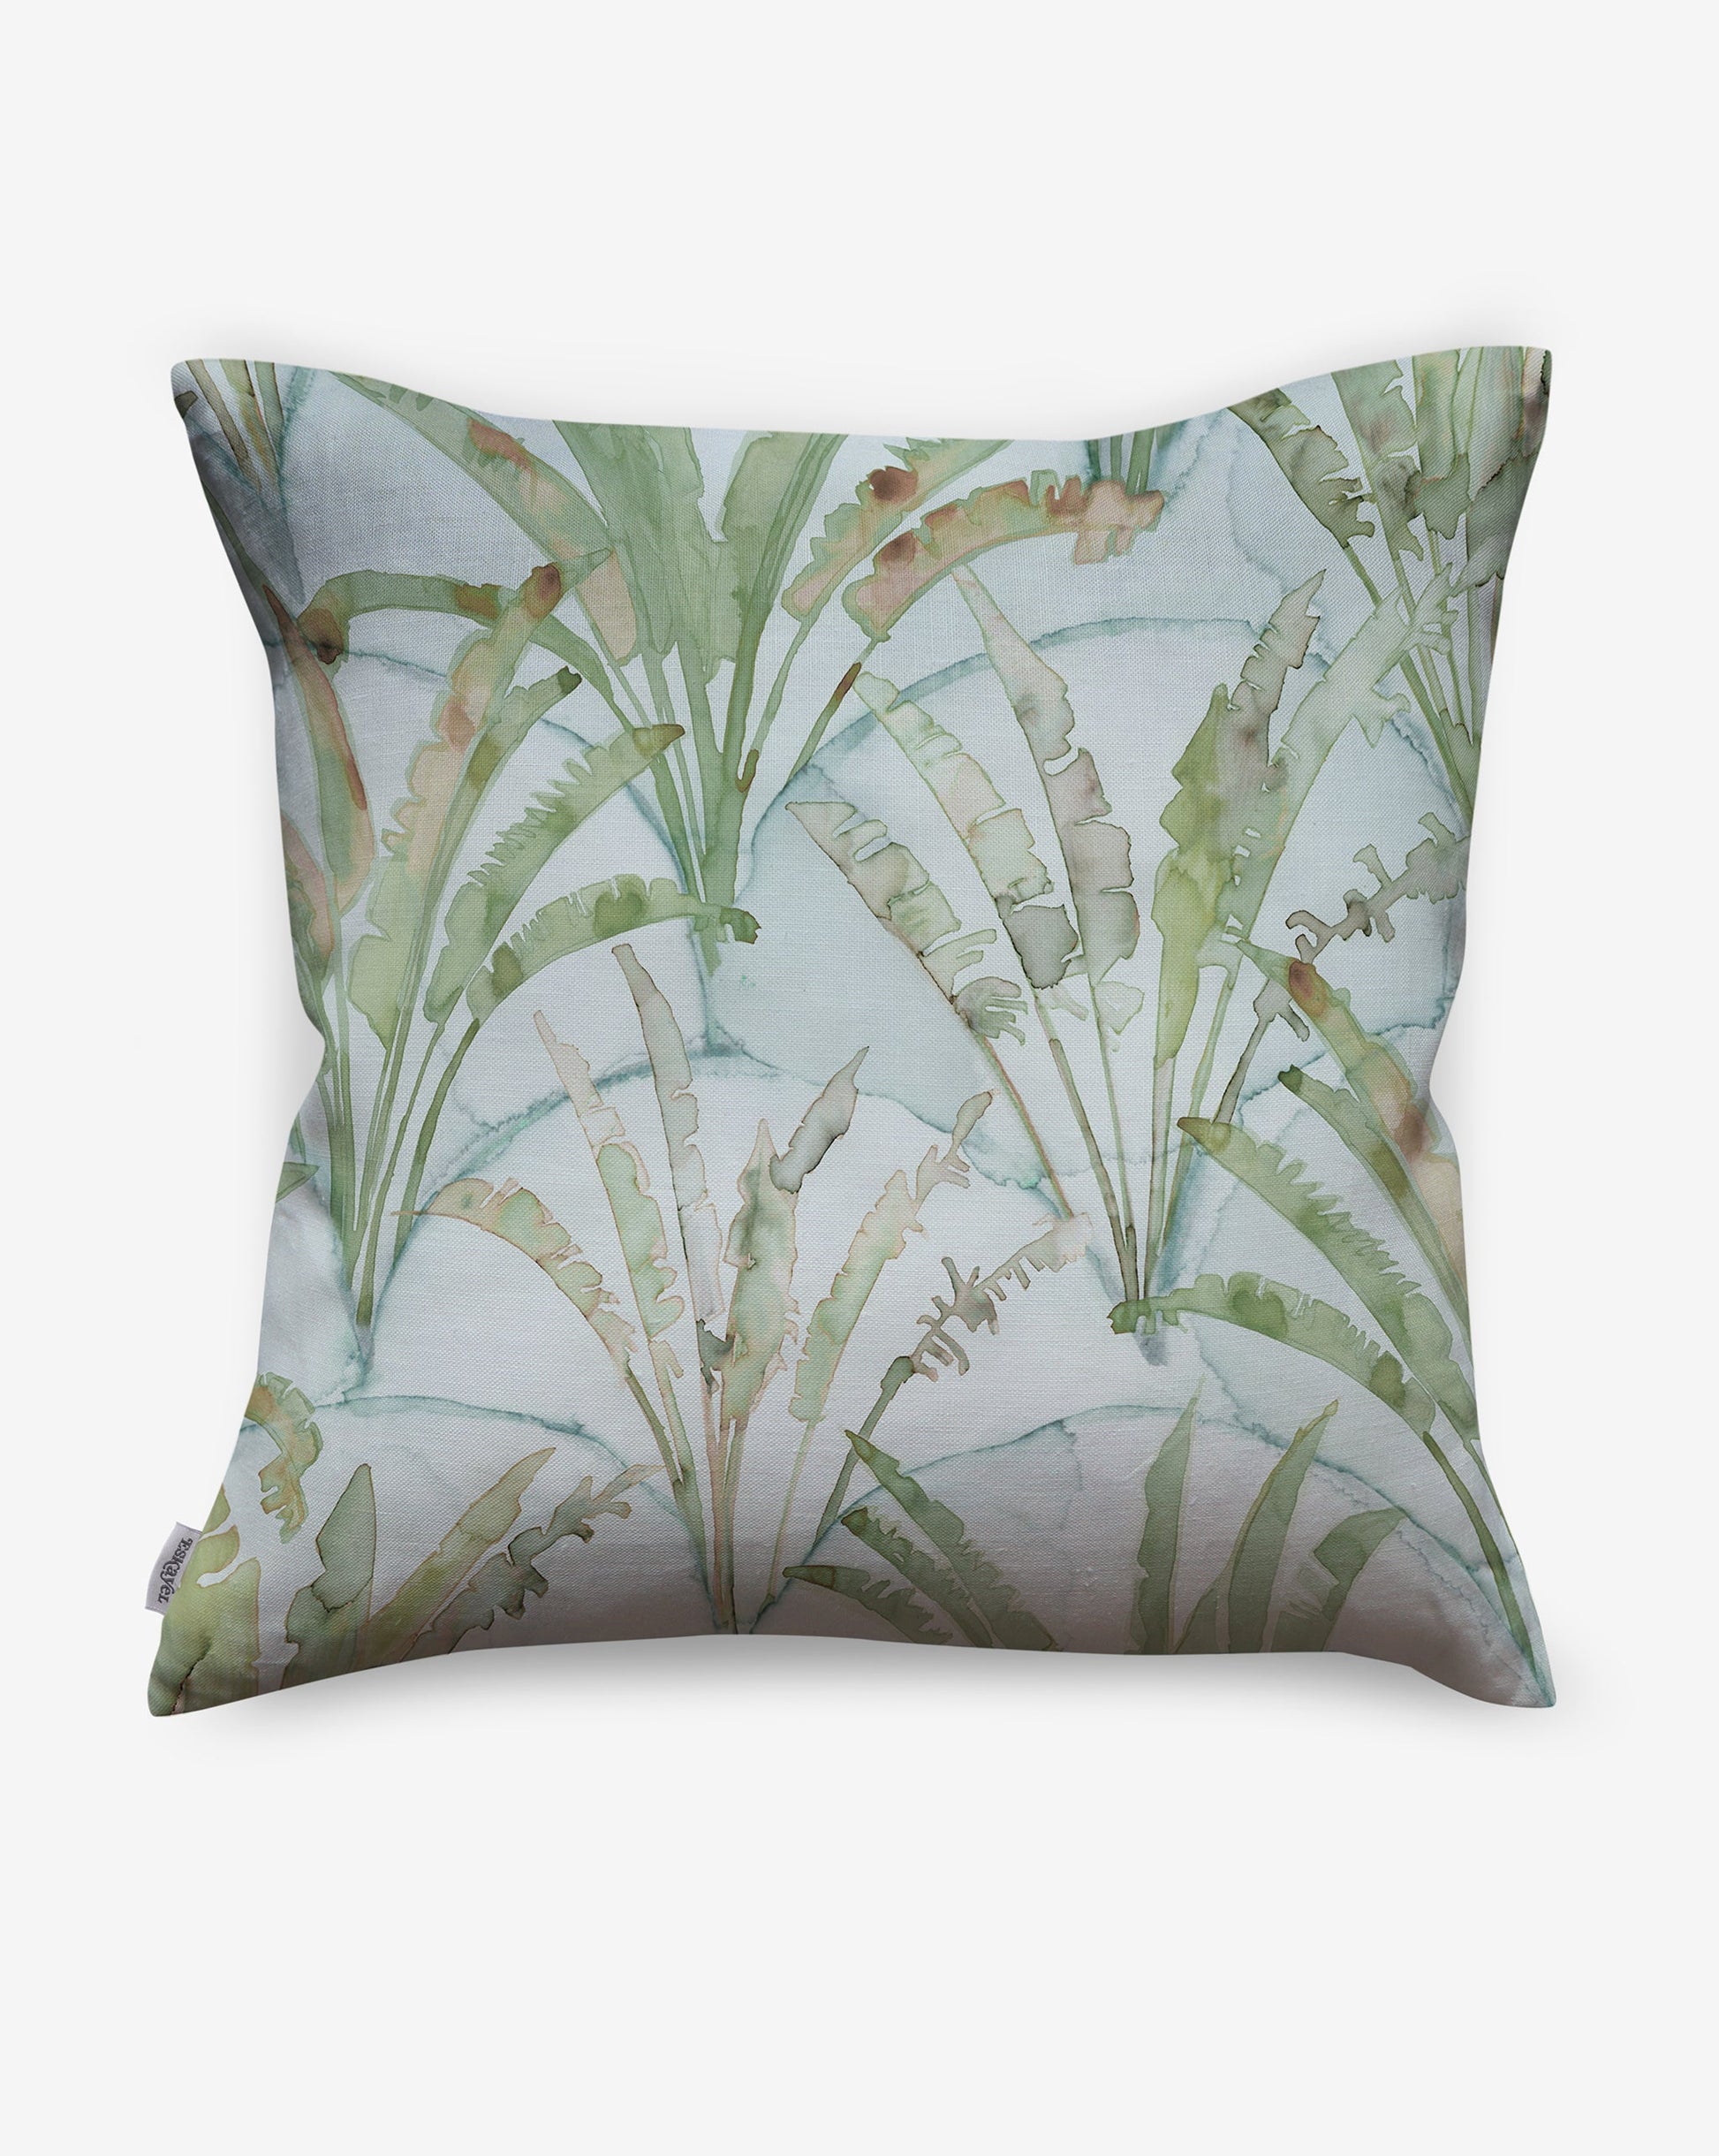 Featuring palms on a geometric scallop backdrop, Travelers Palm pillows in Sage incorporate shades of green and blue.